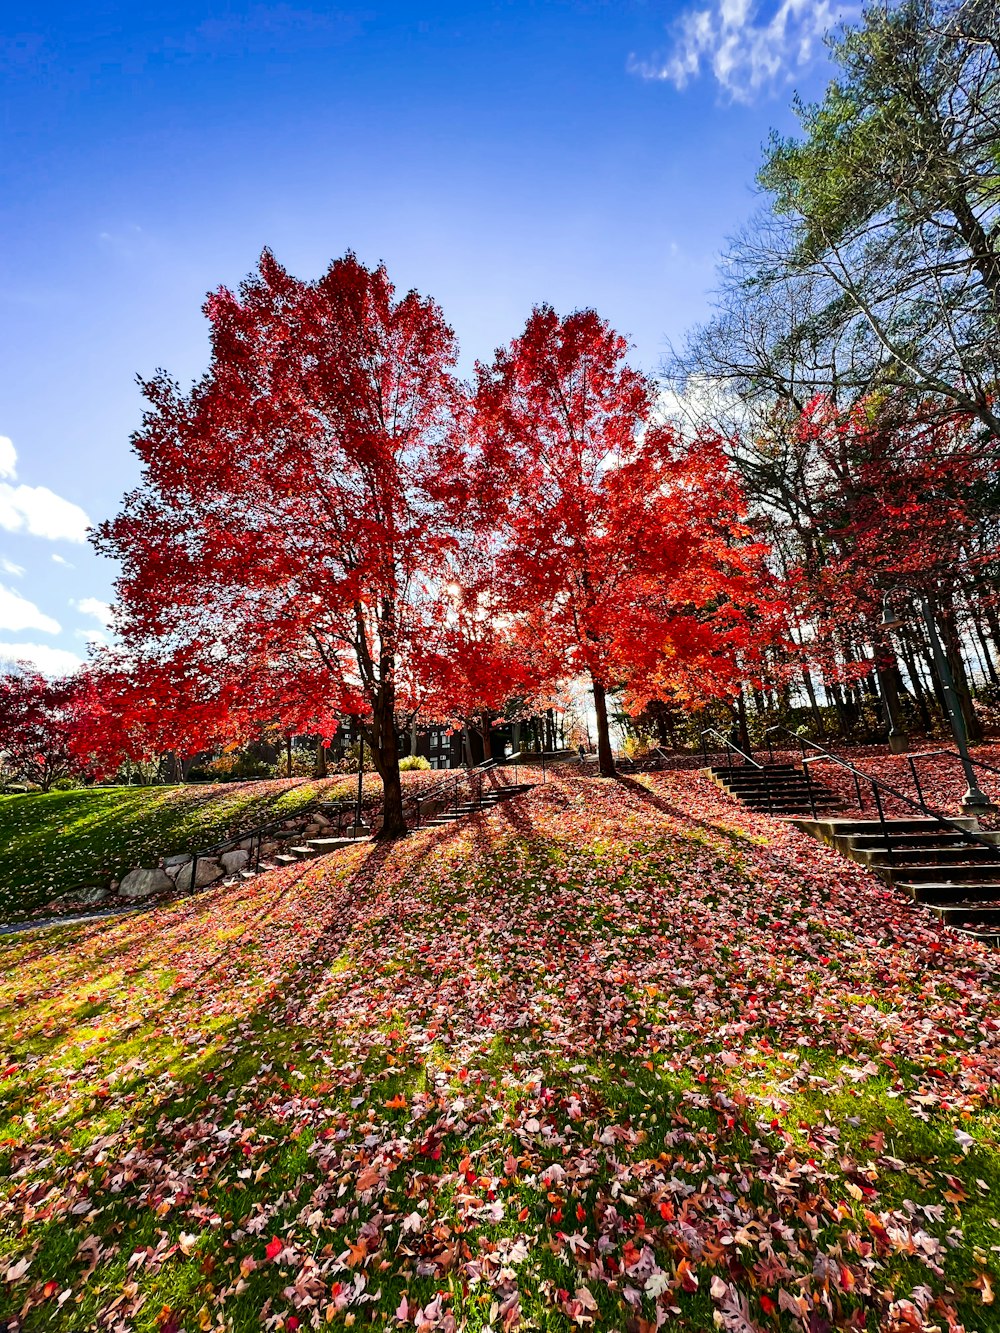 a tree with red leaves on the ground